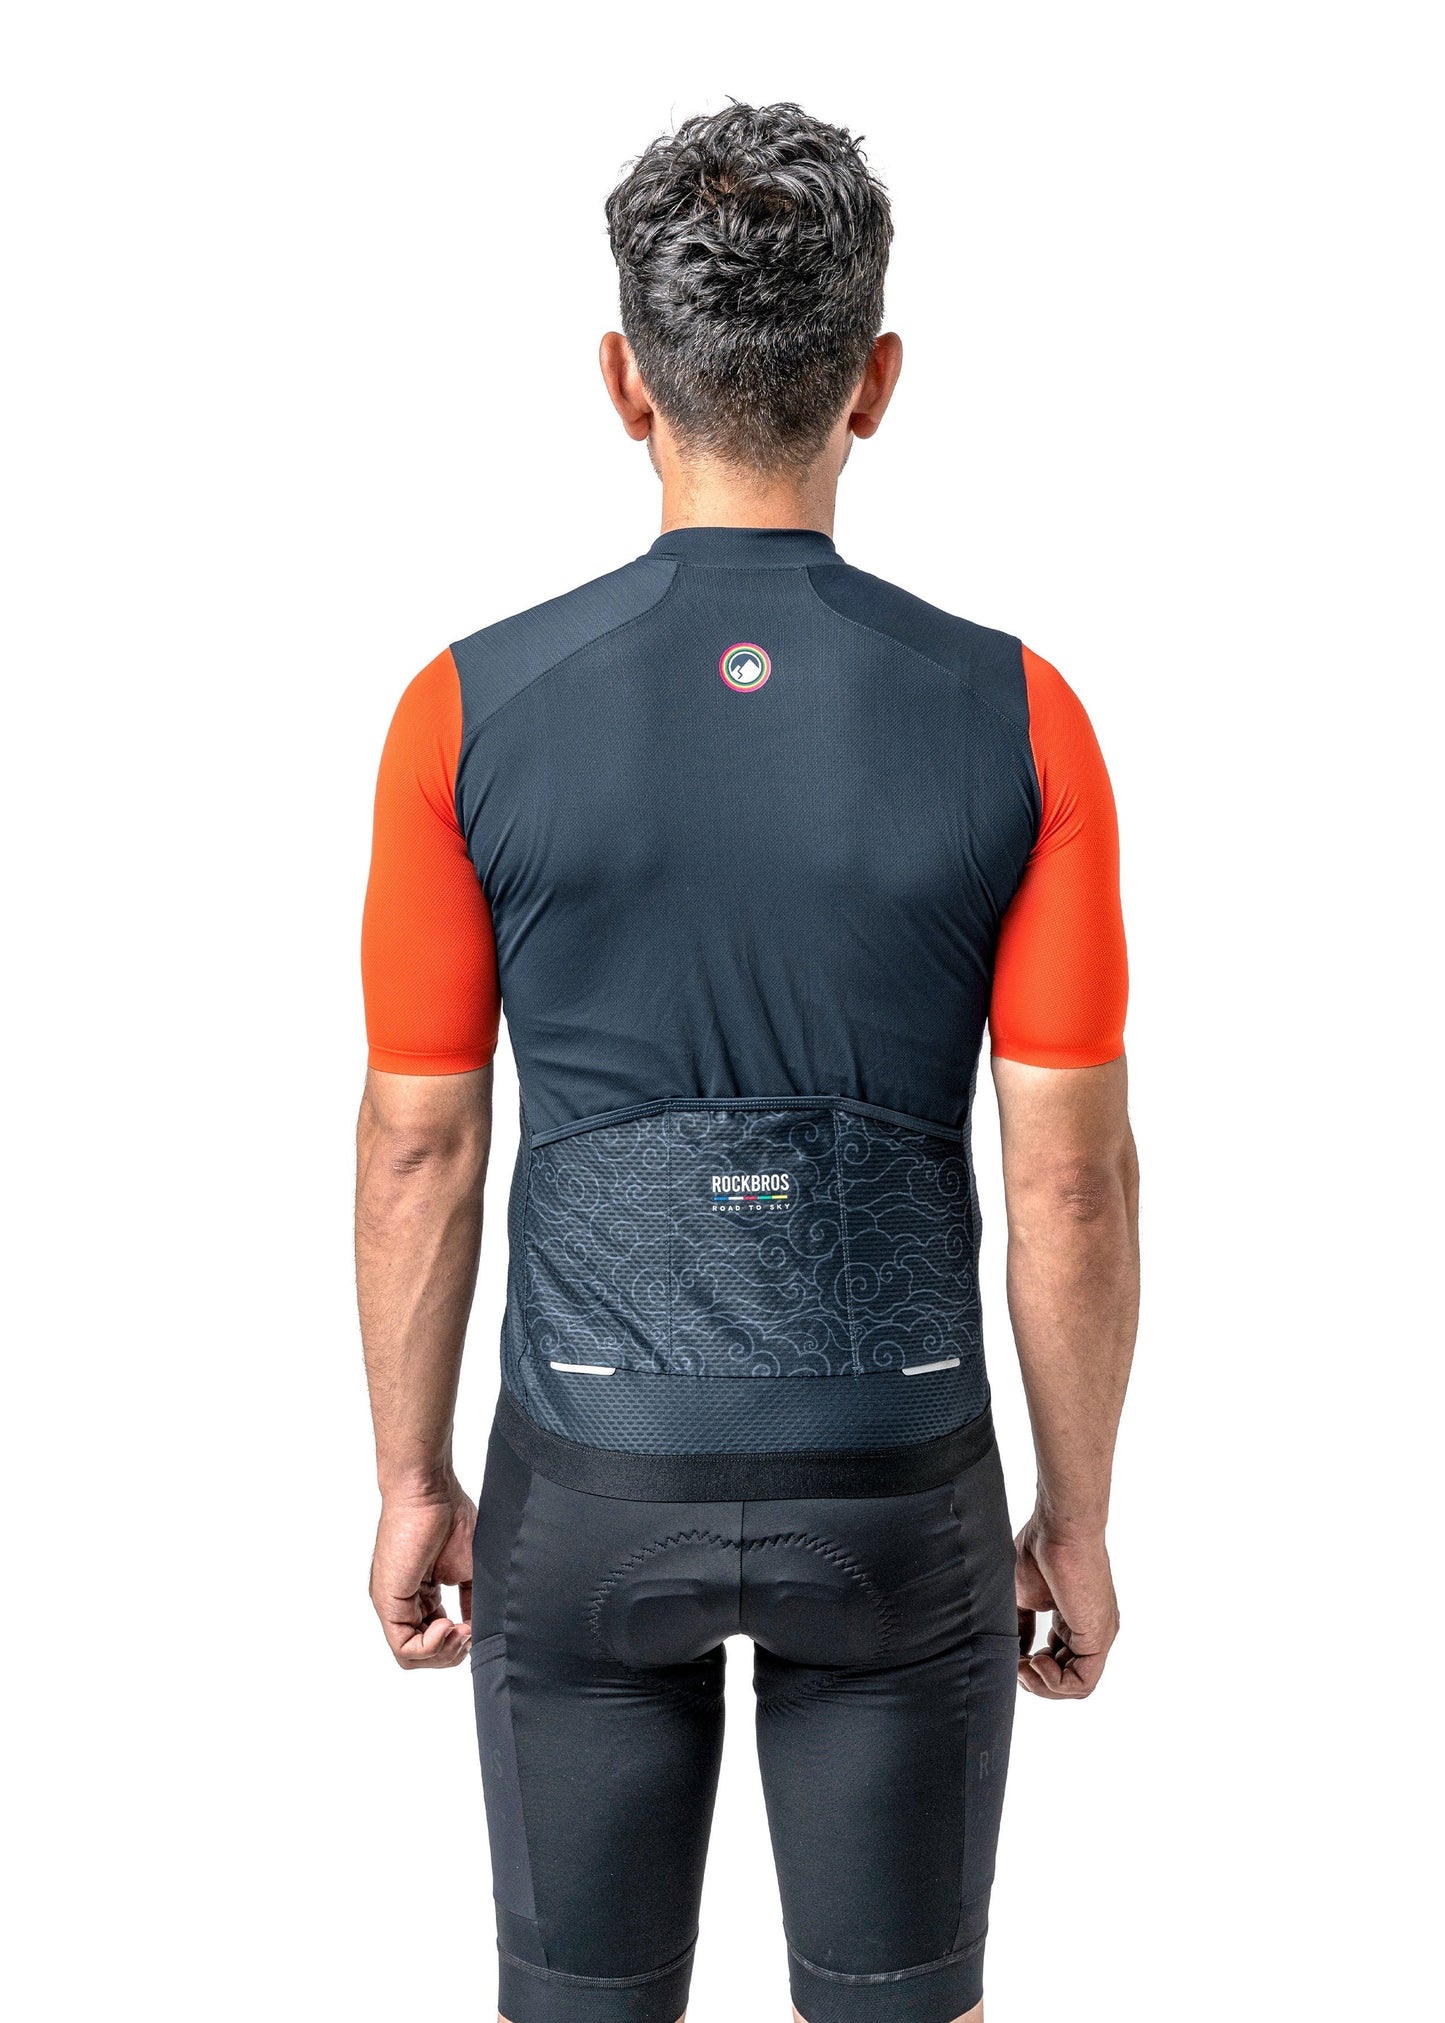 ROAD TO SKY Men's Cycling Short-Sleeved Jersey